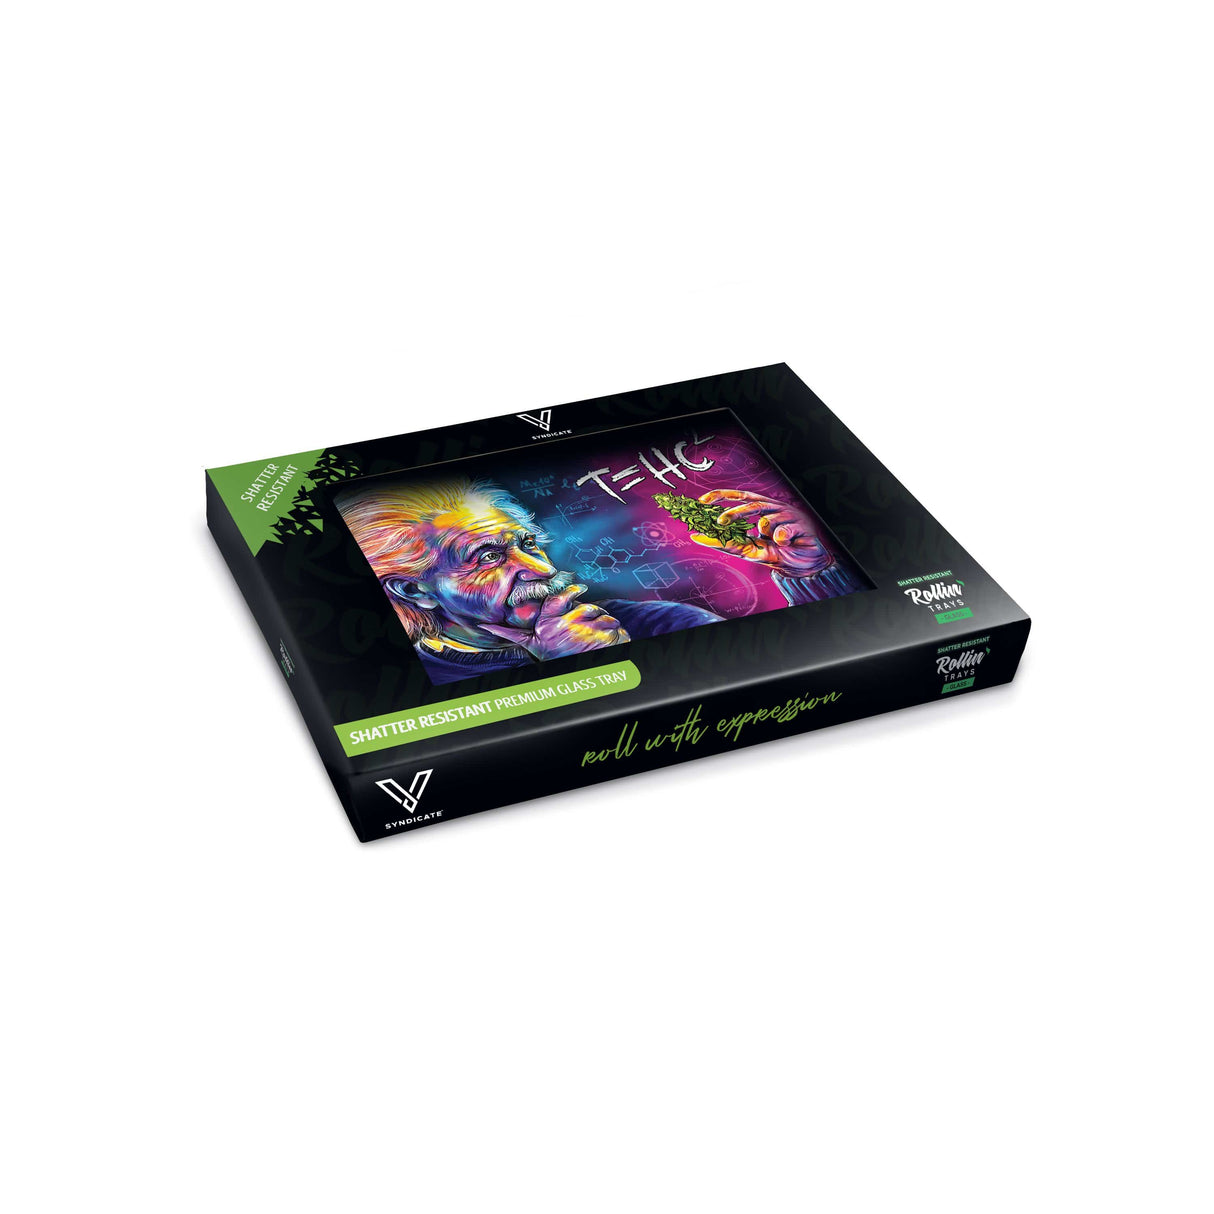 V Syndicate T=HC2 Einstein-themed glass rolling tray, medium size, in black and purple